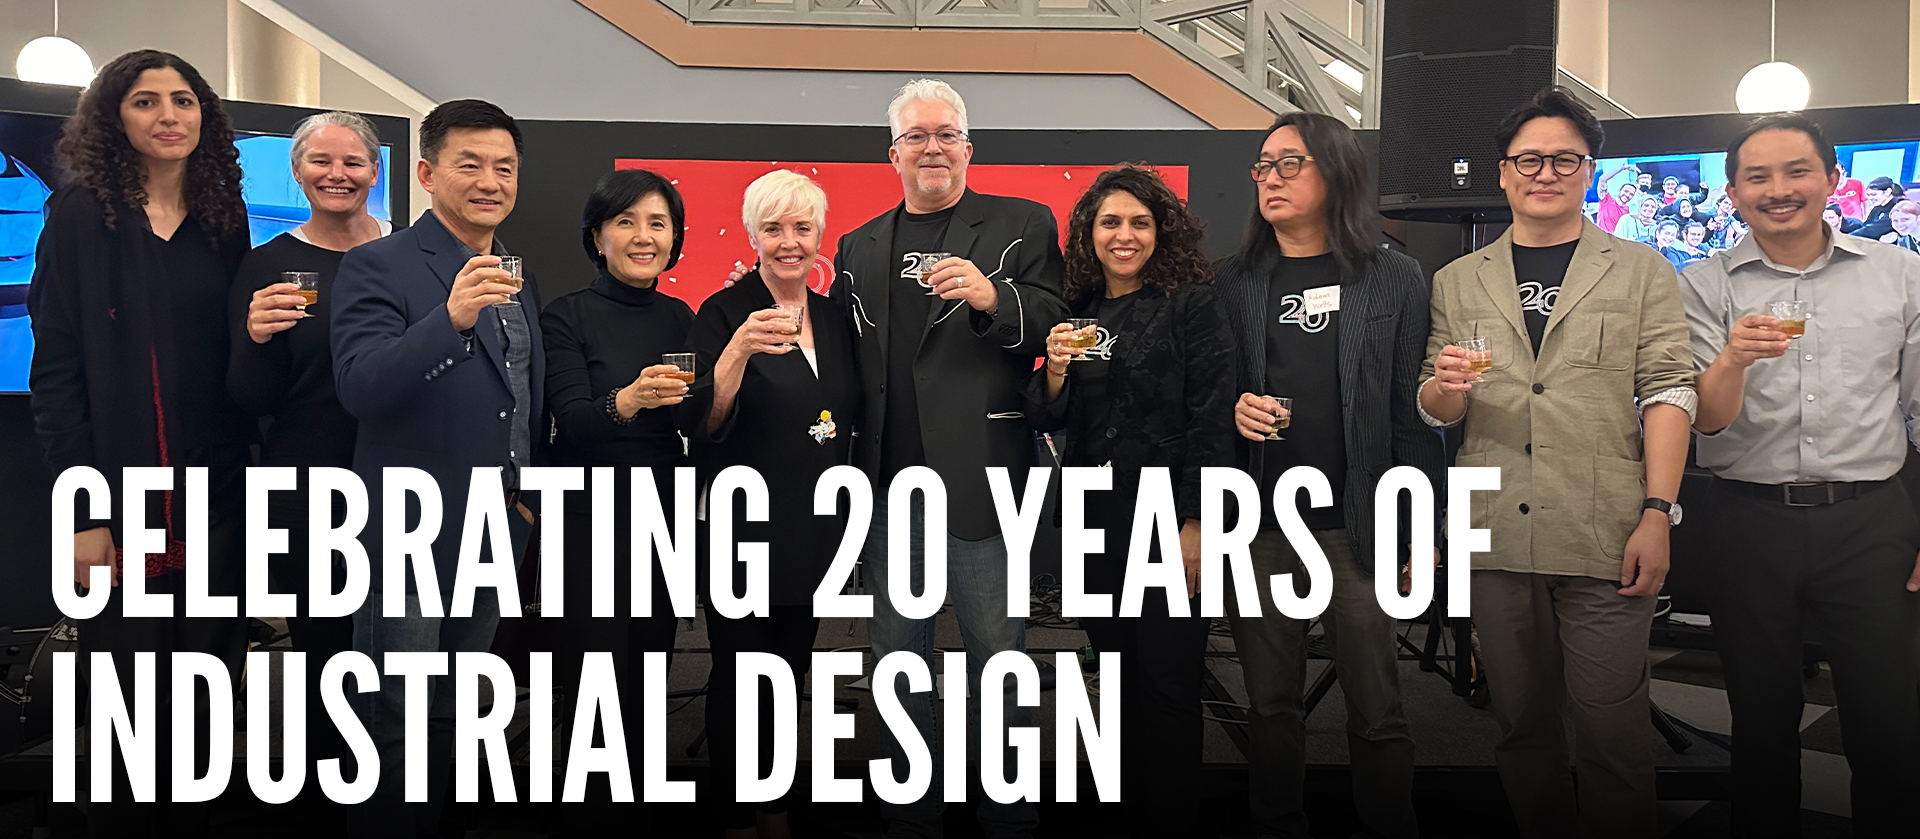 Celebrating 20 Years of Industrial Design